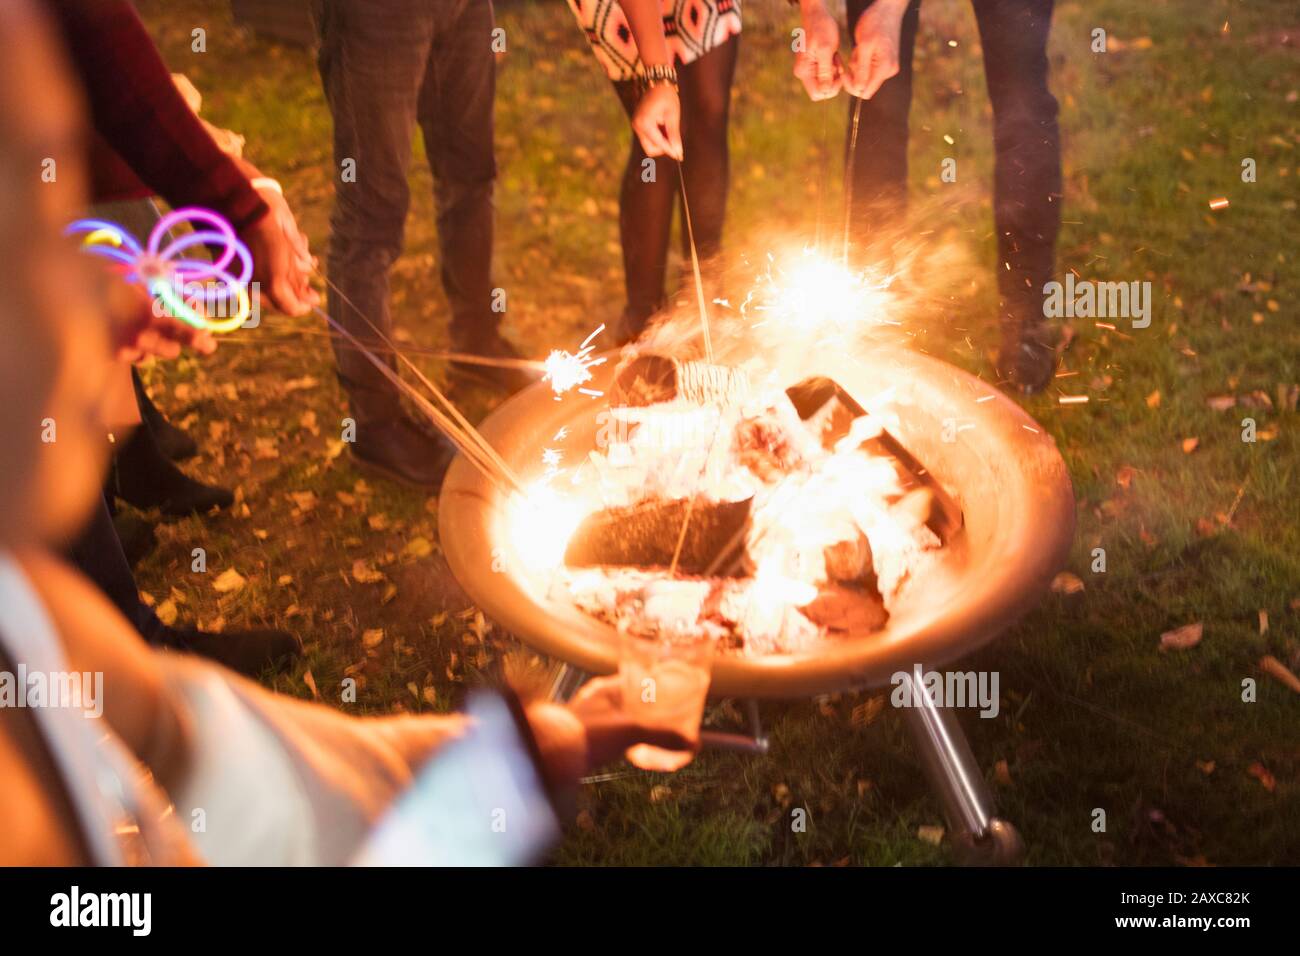 Friends lighting sparklers at fire pit Stock Photo